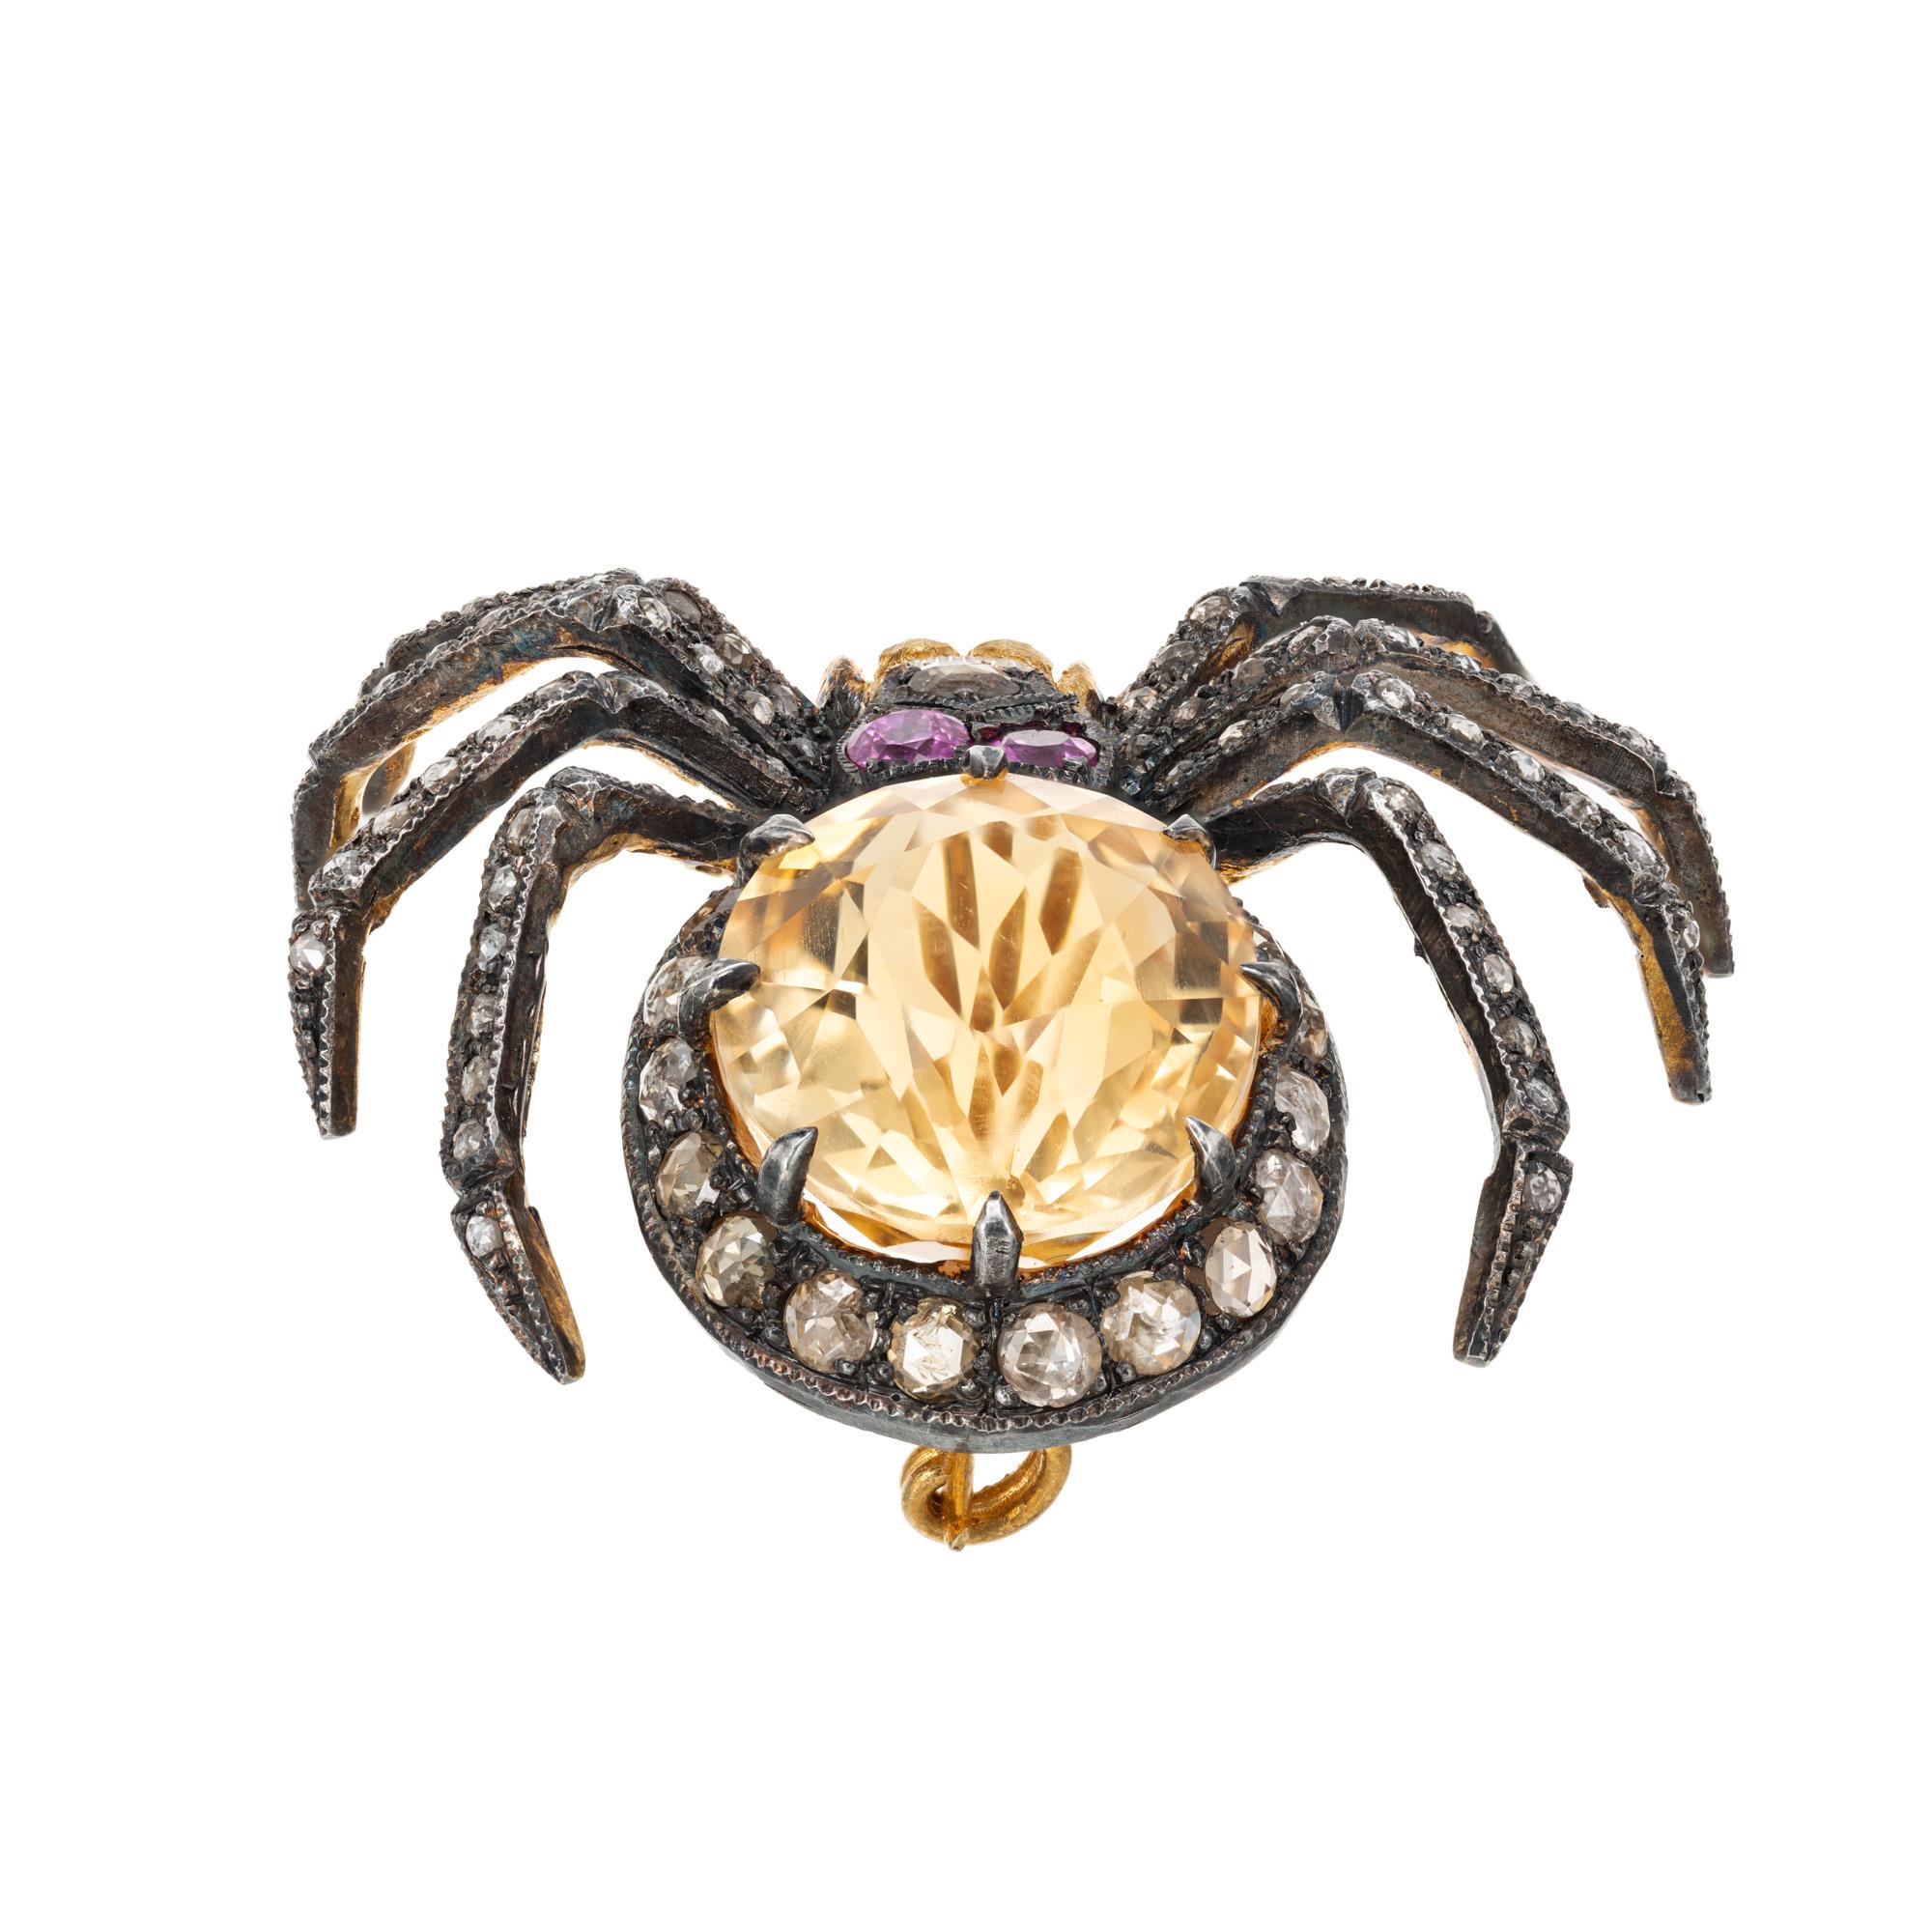 7.00 Carat Citrine Ruby Diamond Silver Spider Brooch Pendant In Good Condition For Sale In Stamford, CT